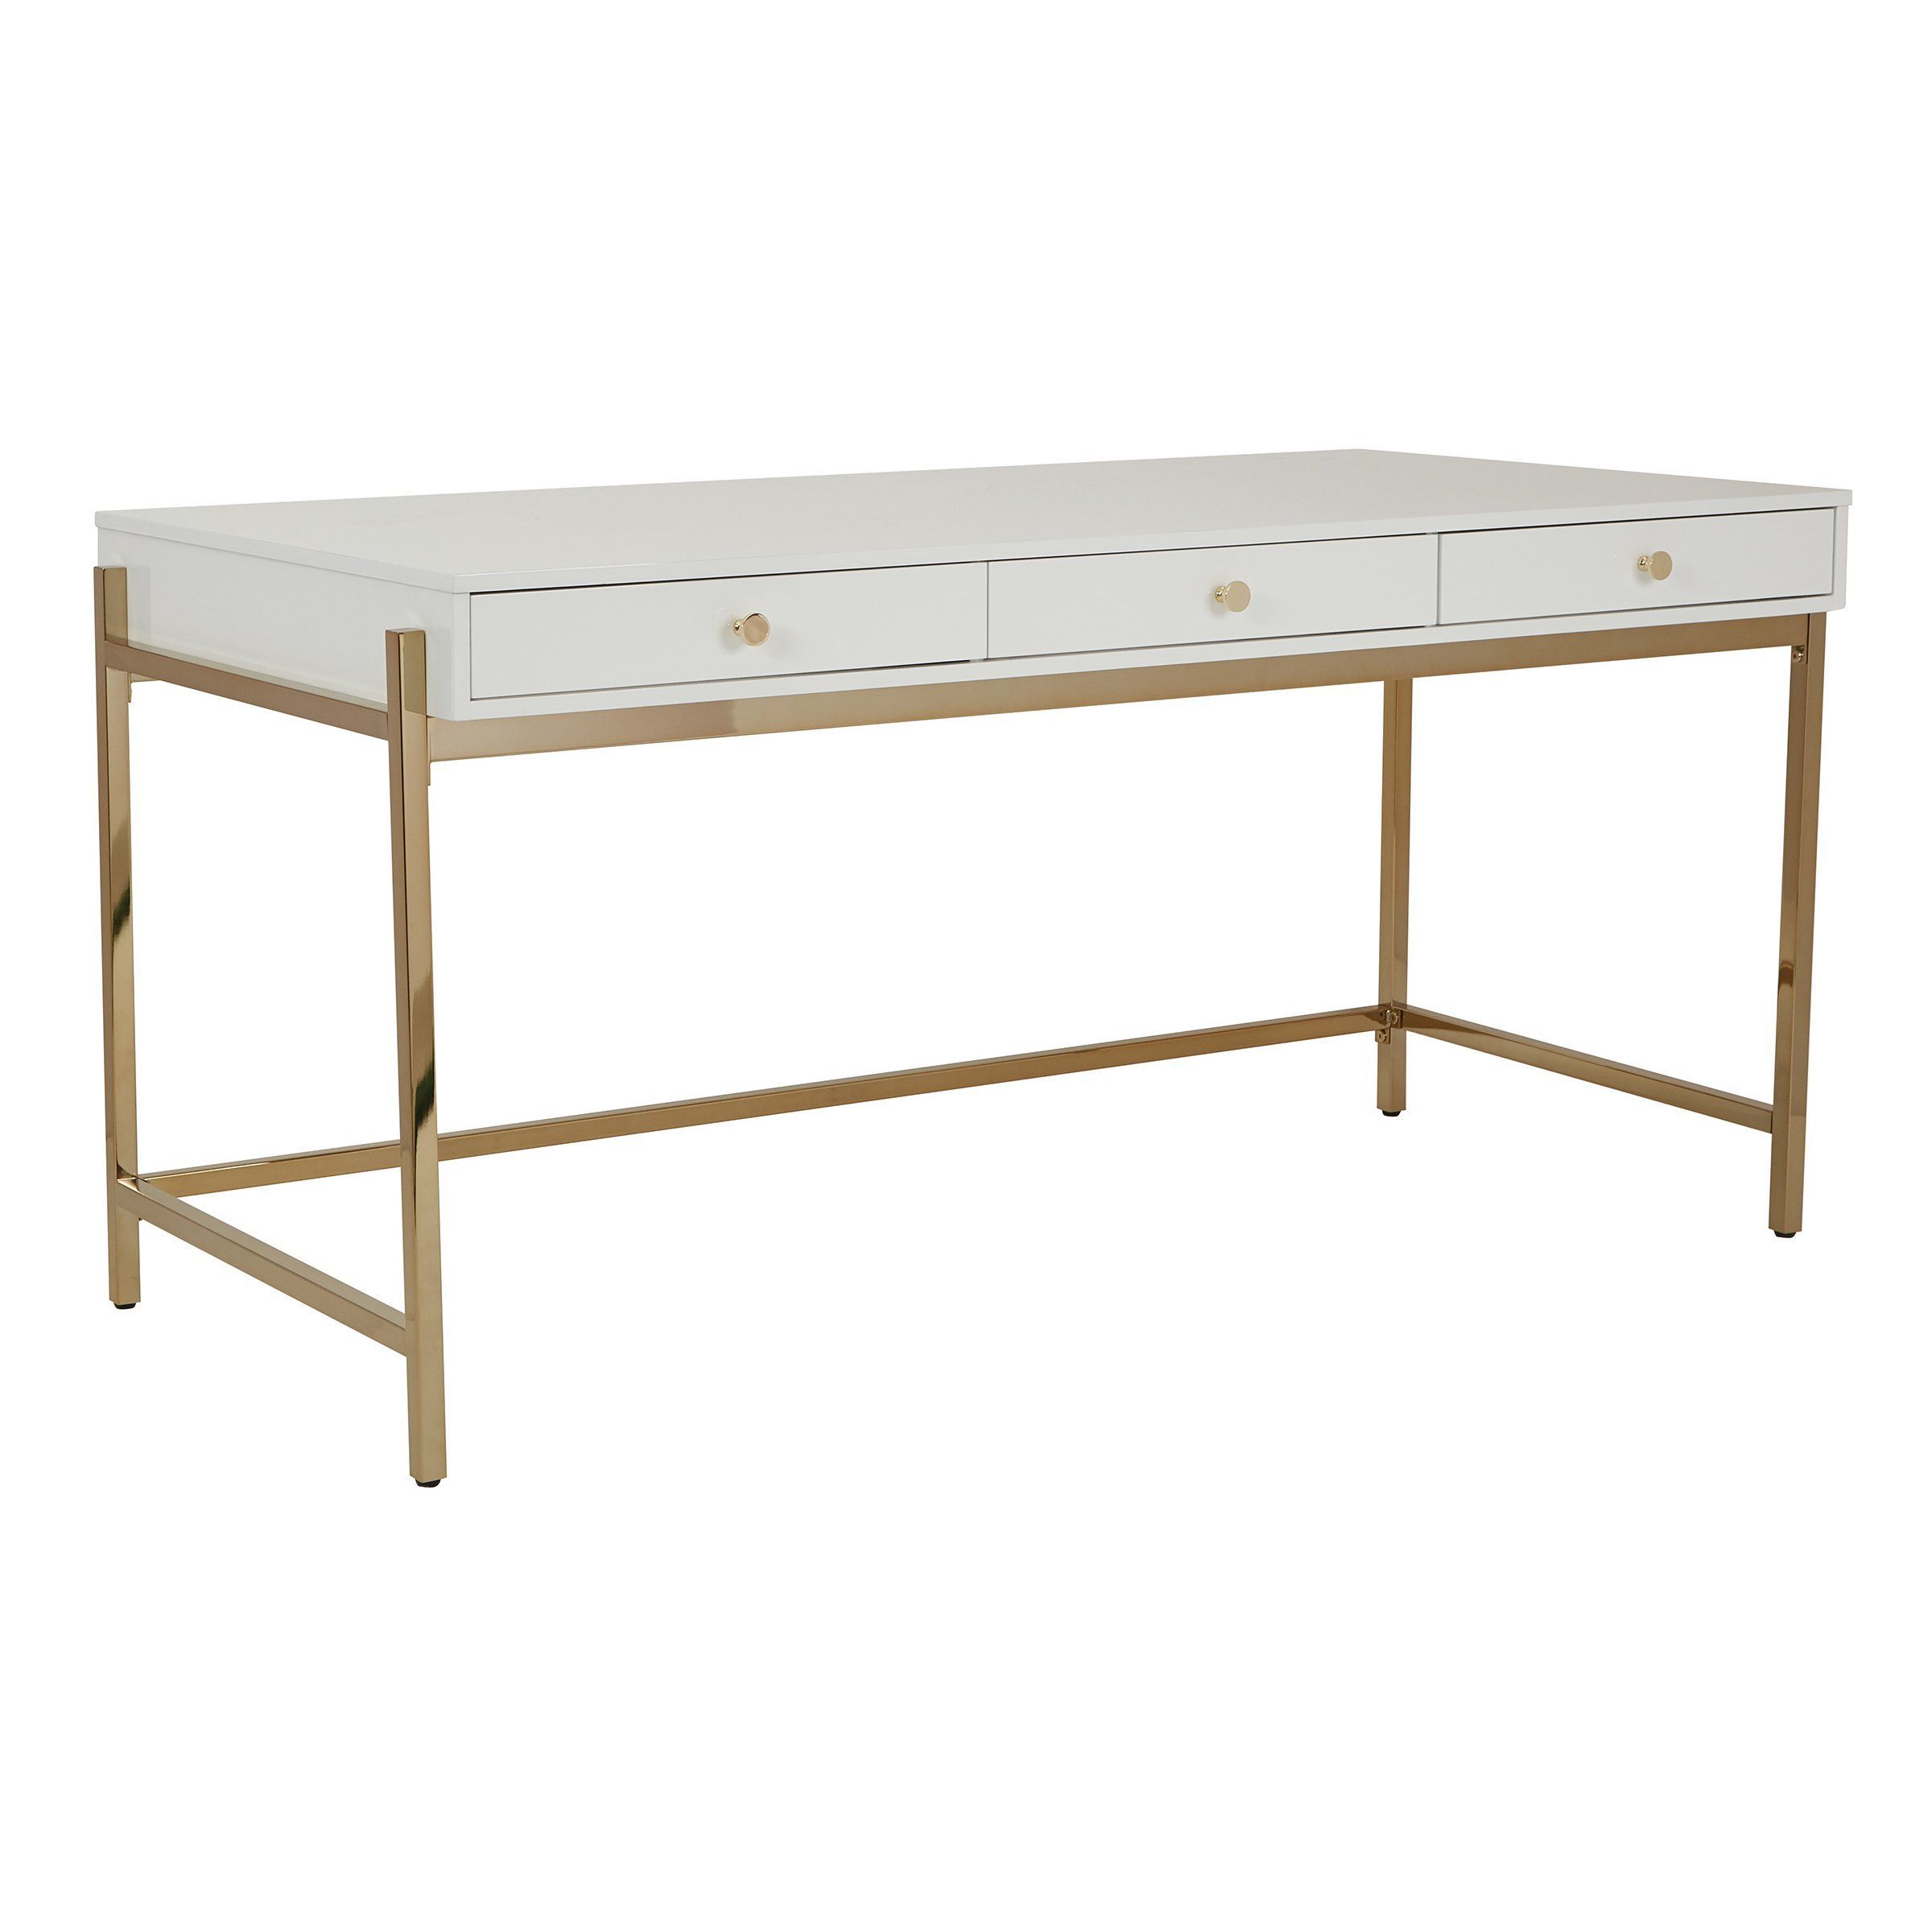 Osp Designs Ashleigh Writing Desk | Home Office Furniture, Furniture Pertaining To White And Gold Writing Desks (View 10 of 15)